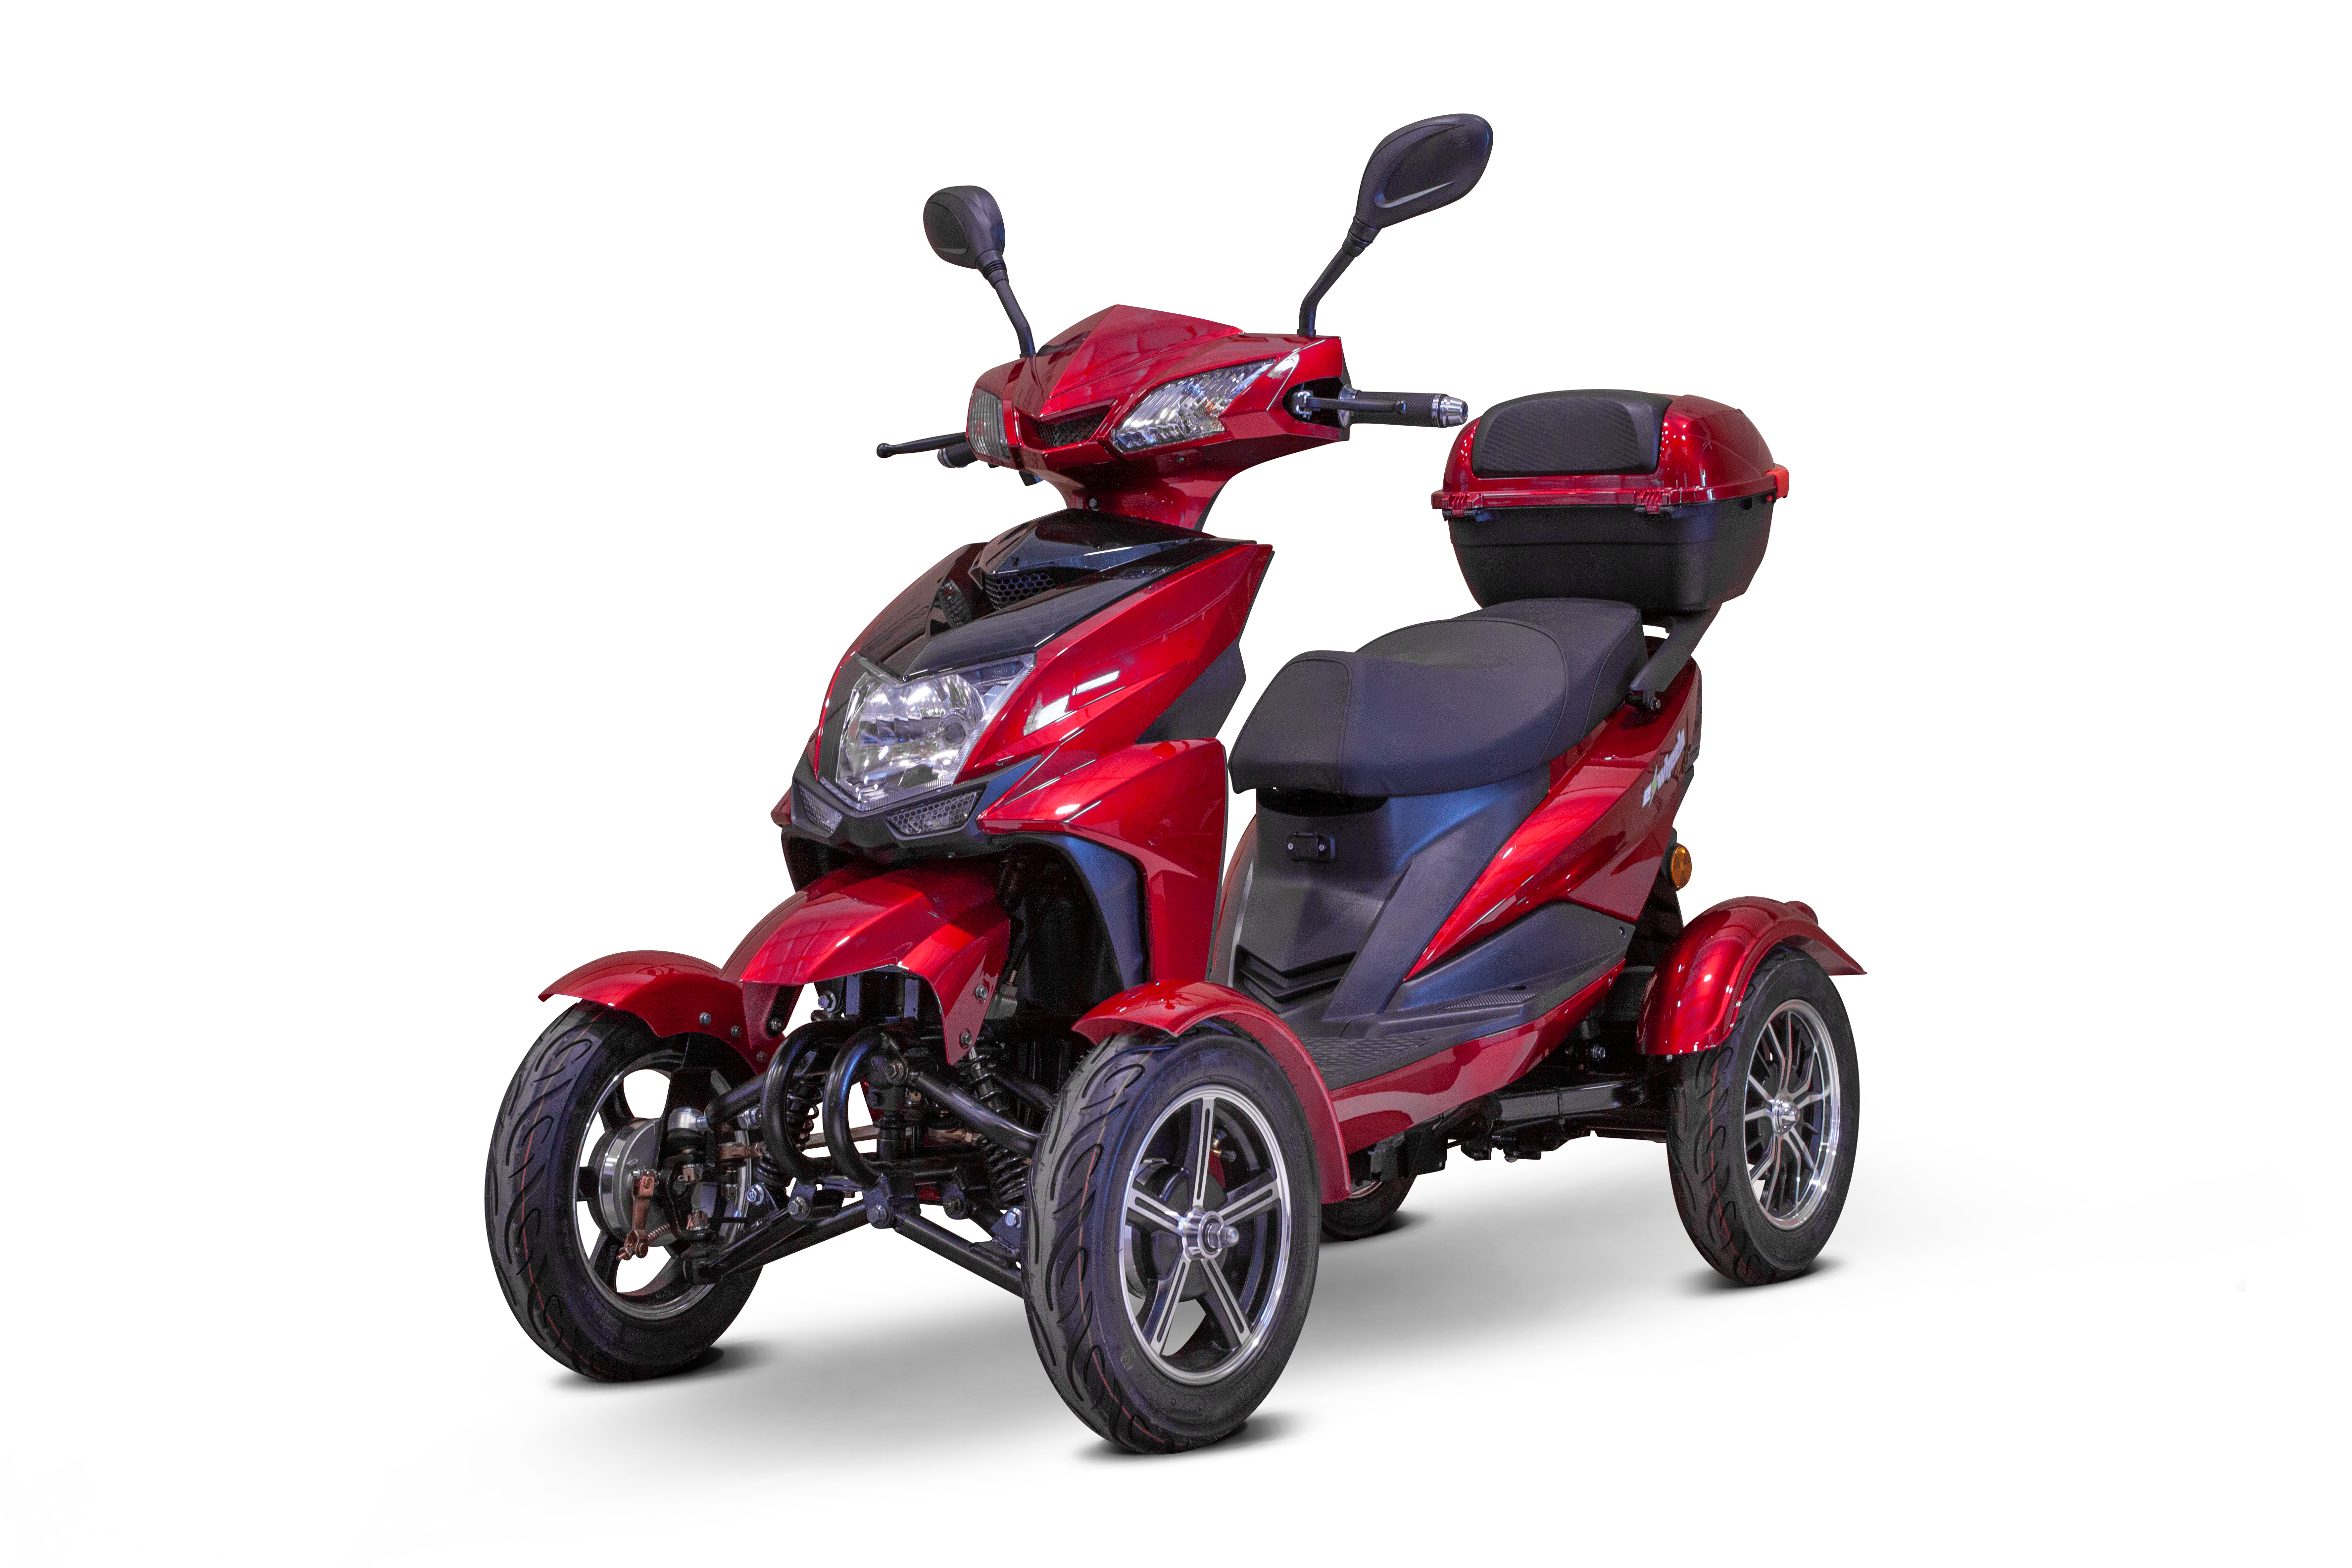 RED 4 WHEEL SCOOTER EW-14 Four Wheel Recreational Scooter By Ewheels - PureUps